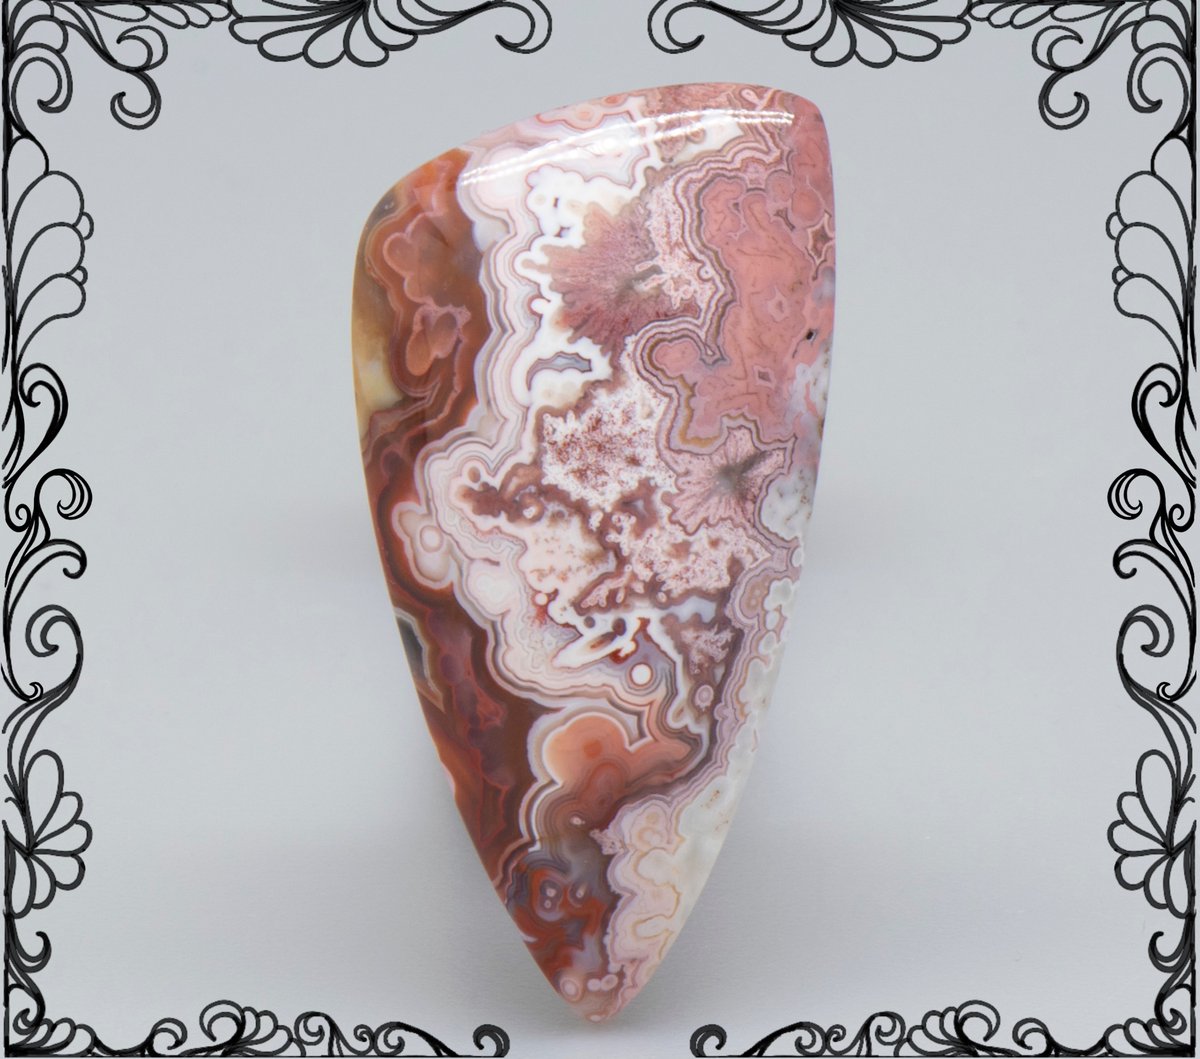 Beautiful pink and red lace that dances across the surface of this Laguna Lace Agate. Handcut by Nyssa in Wisconsin USA av127
#lagunalace #cabochons #laceagate #lapidary #silicadreams